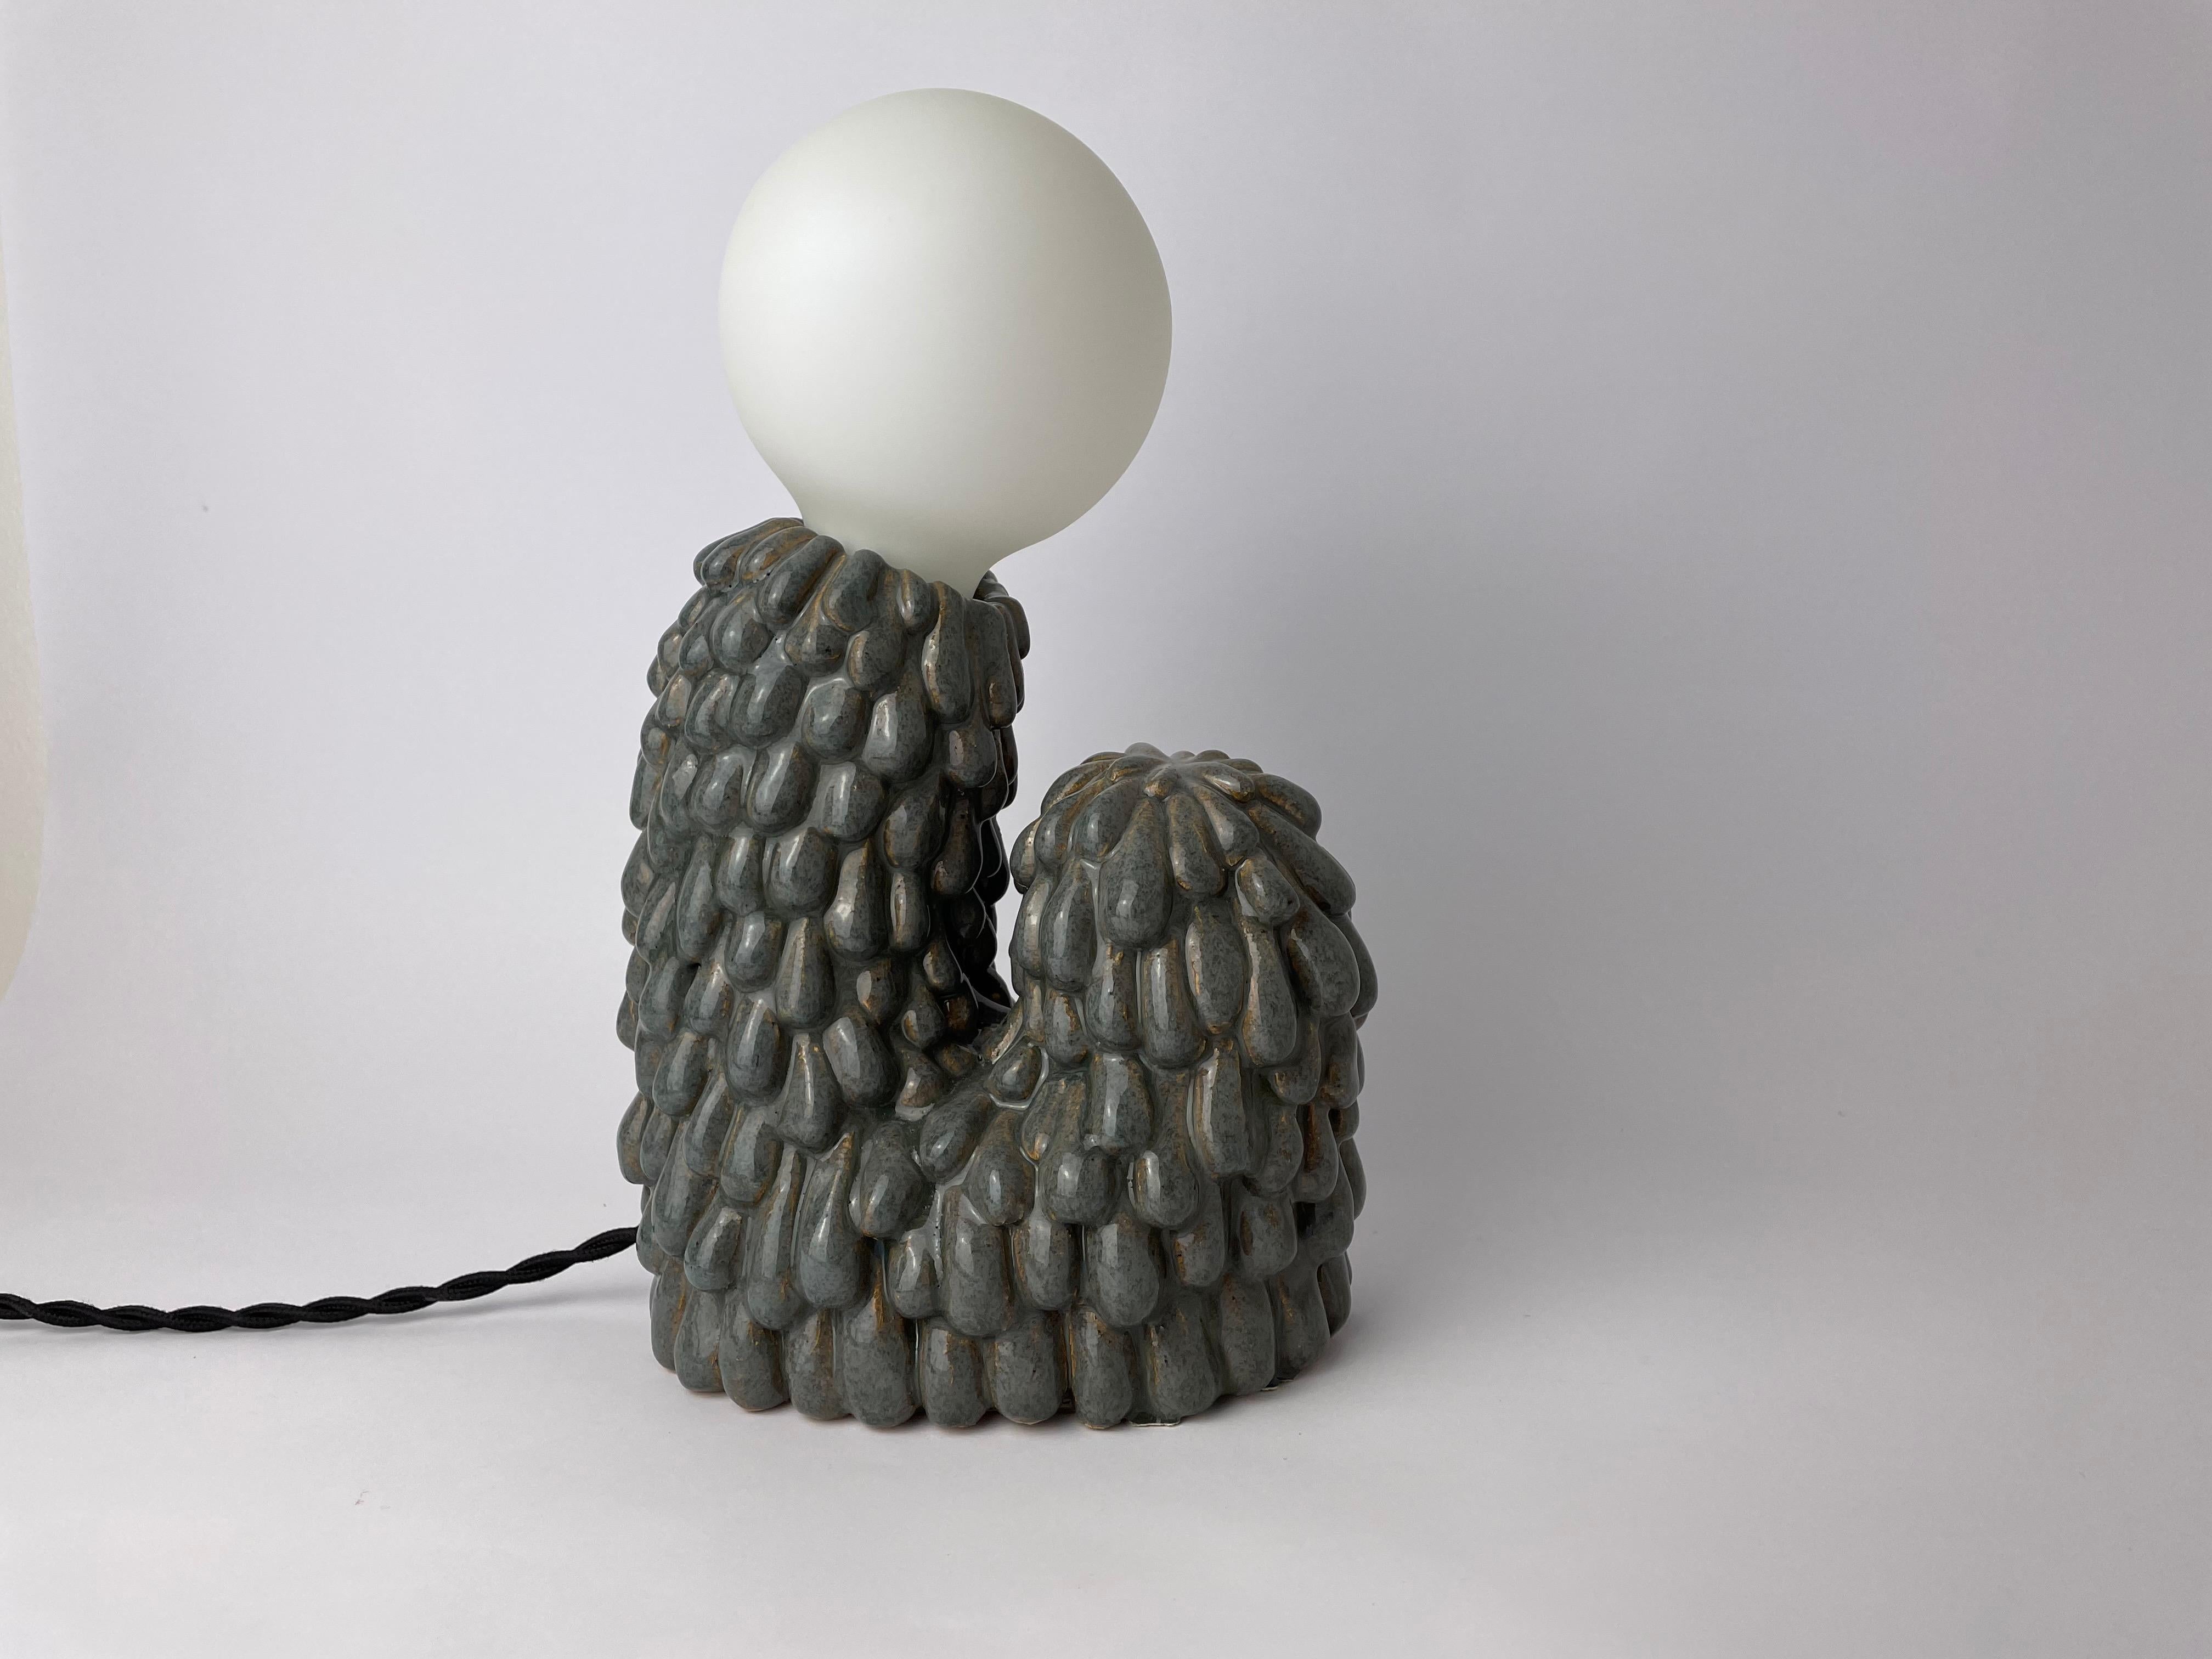 Small evolve lamp by HS studio.
Morphic collection.
Dimensions: 28 x 18 x 9cm.
Materials: ceramic.

Also available: 43 x 40 x 15 cm.

Hannah Simpson is a ceramic artist, based in Kent, UK. With a passion for creating unique items, Hannah's